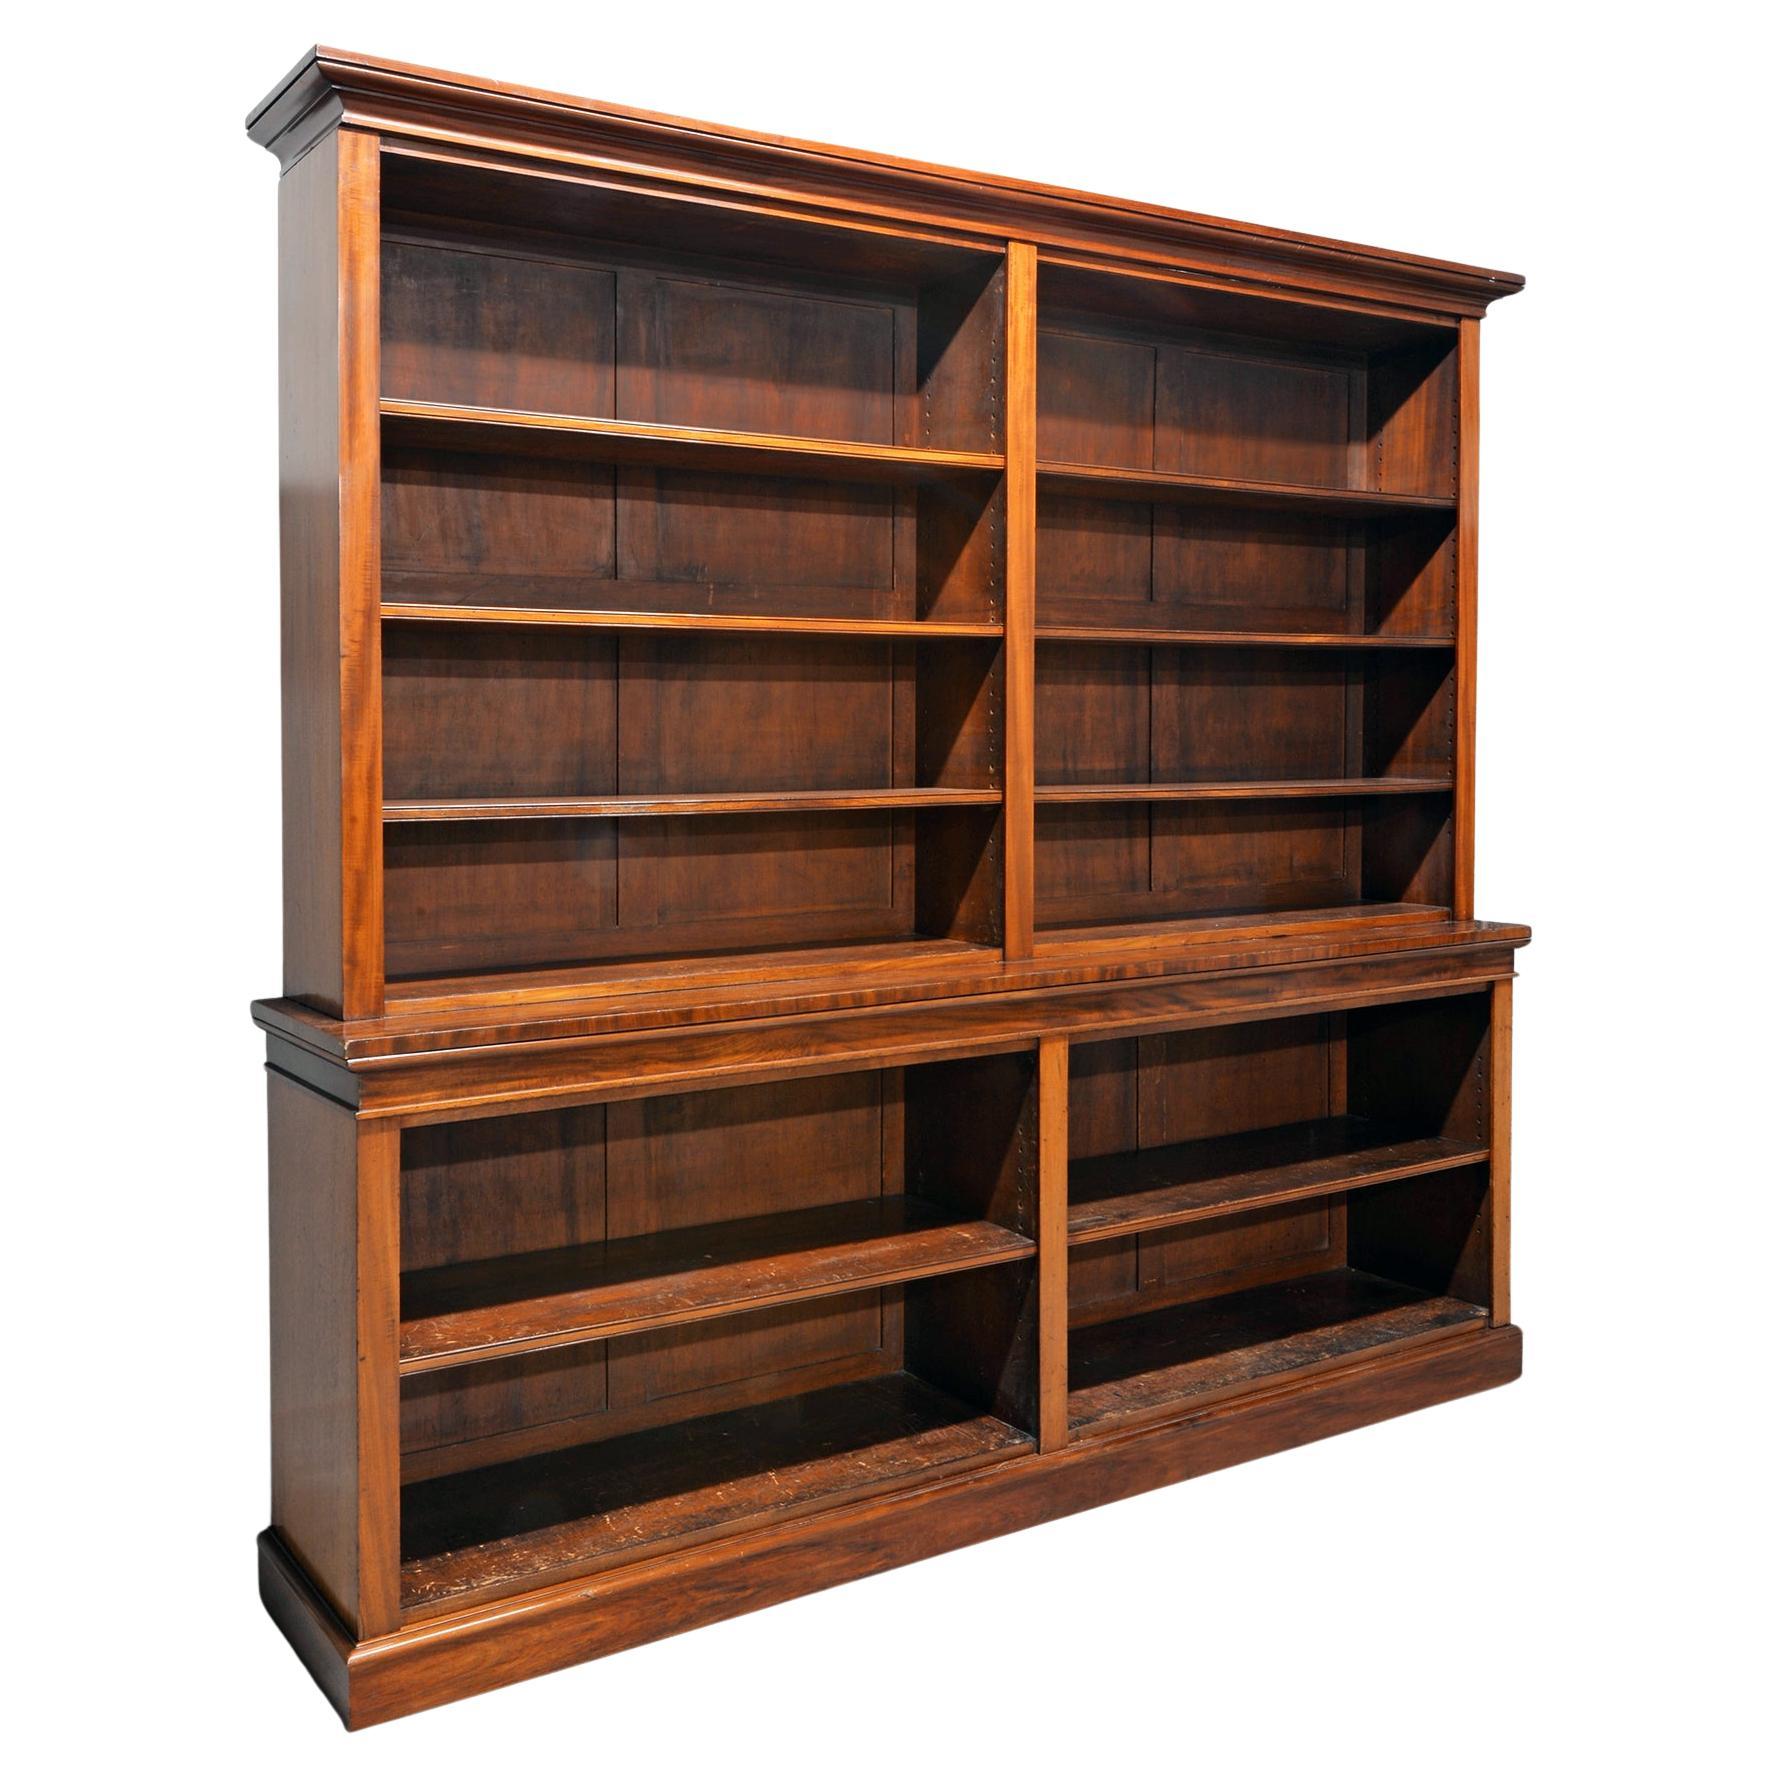 Large Victorian Breakfront Open Bookcase in Four-Parts, Mahogany, c. 1860 For Sale